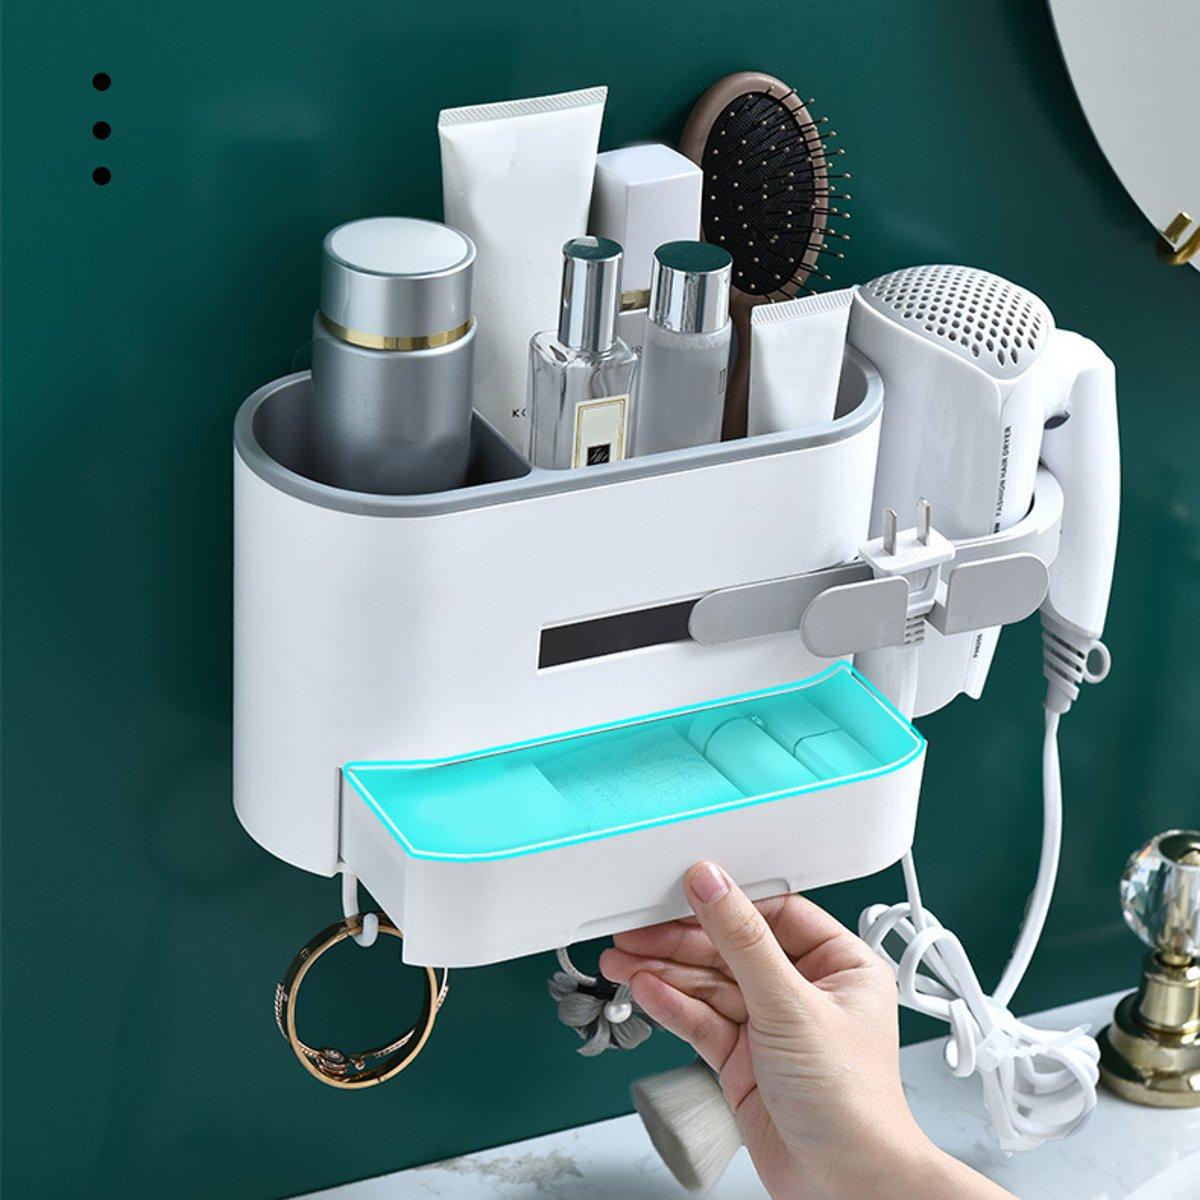 Toilet Shelve Hair Dryer,Curling Wand or Straightener Comb Holder Bathroom Wall Mount Stand Set Wall Hanger